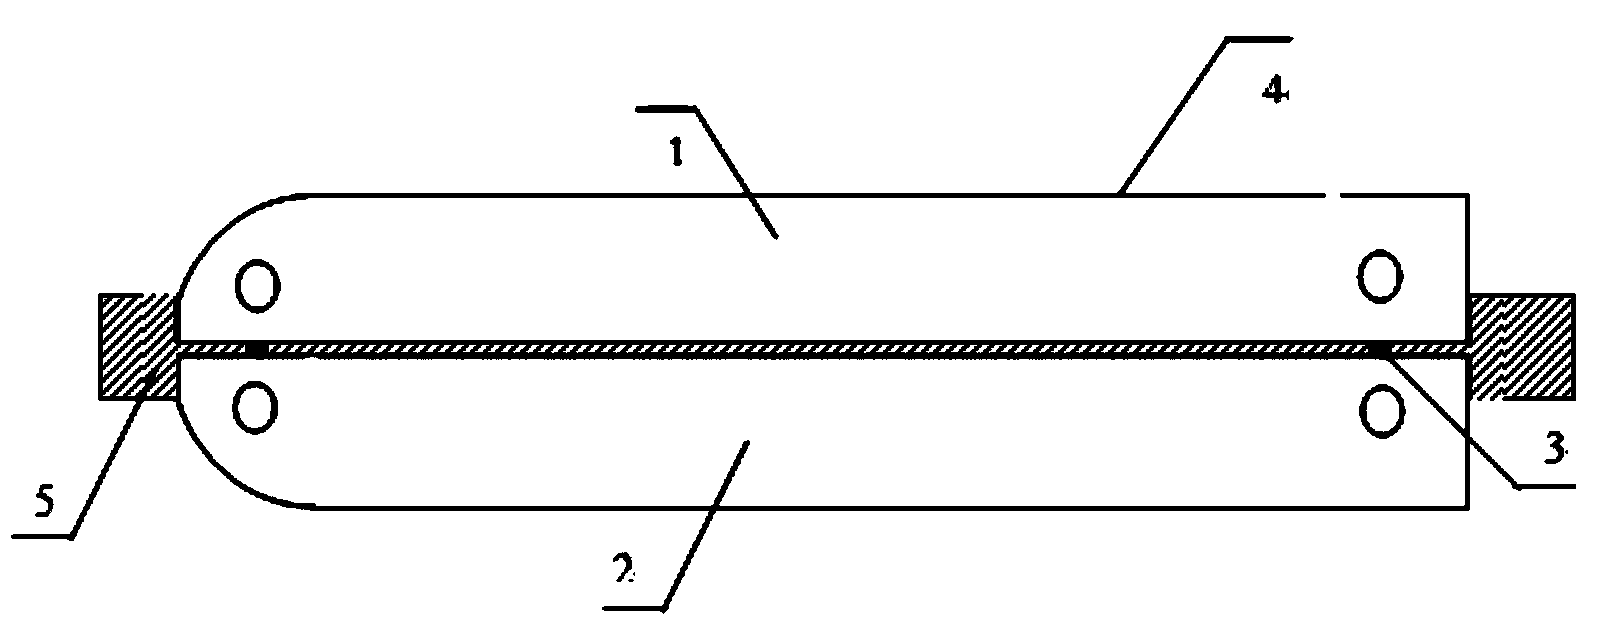 Overhead bare conductor expanding and reinforced insulation structure